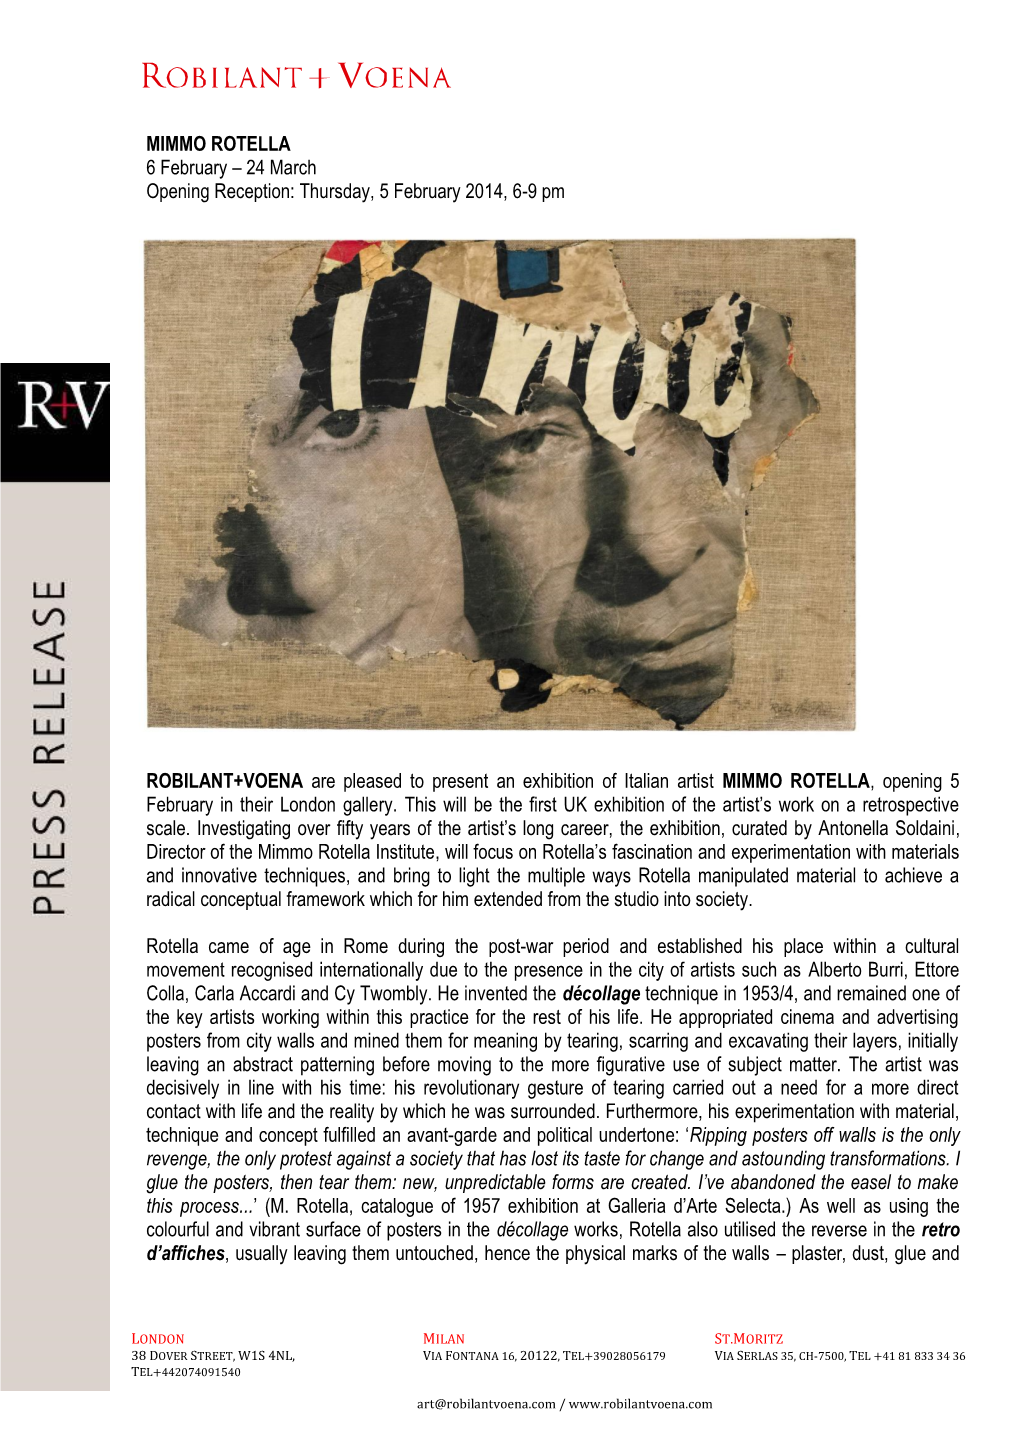 MIMMO ROTELLA 6 February – 24 March Opening Reception: Thursday, 5 February 2014, 6-9 Pm